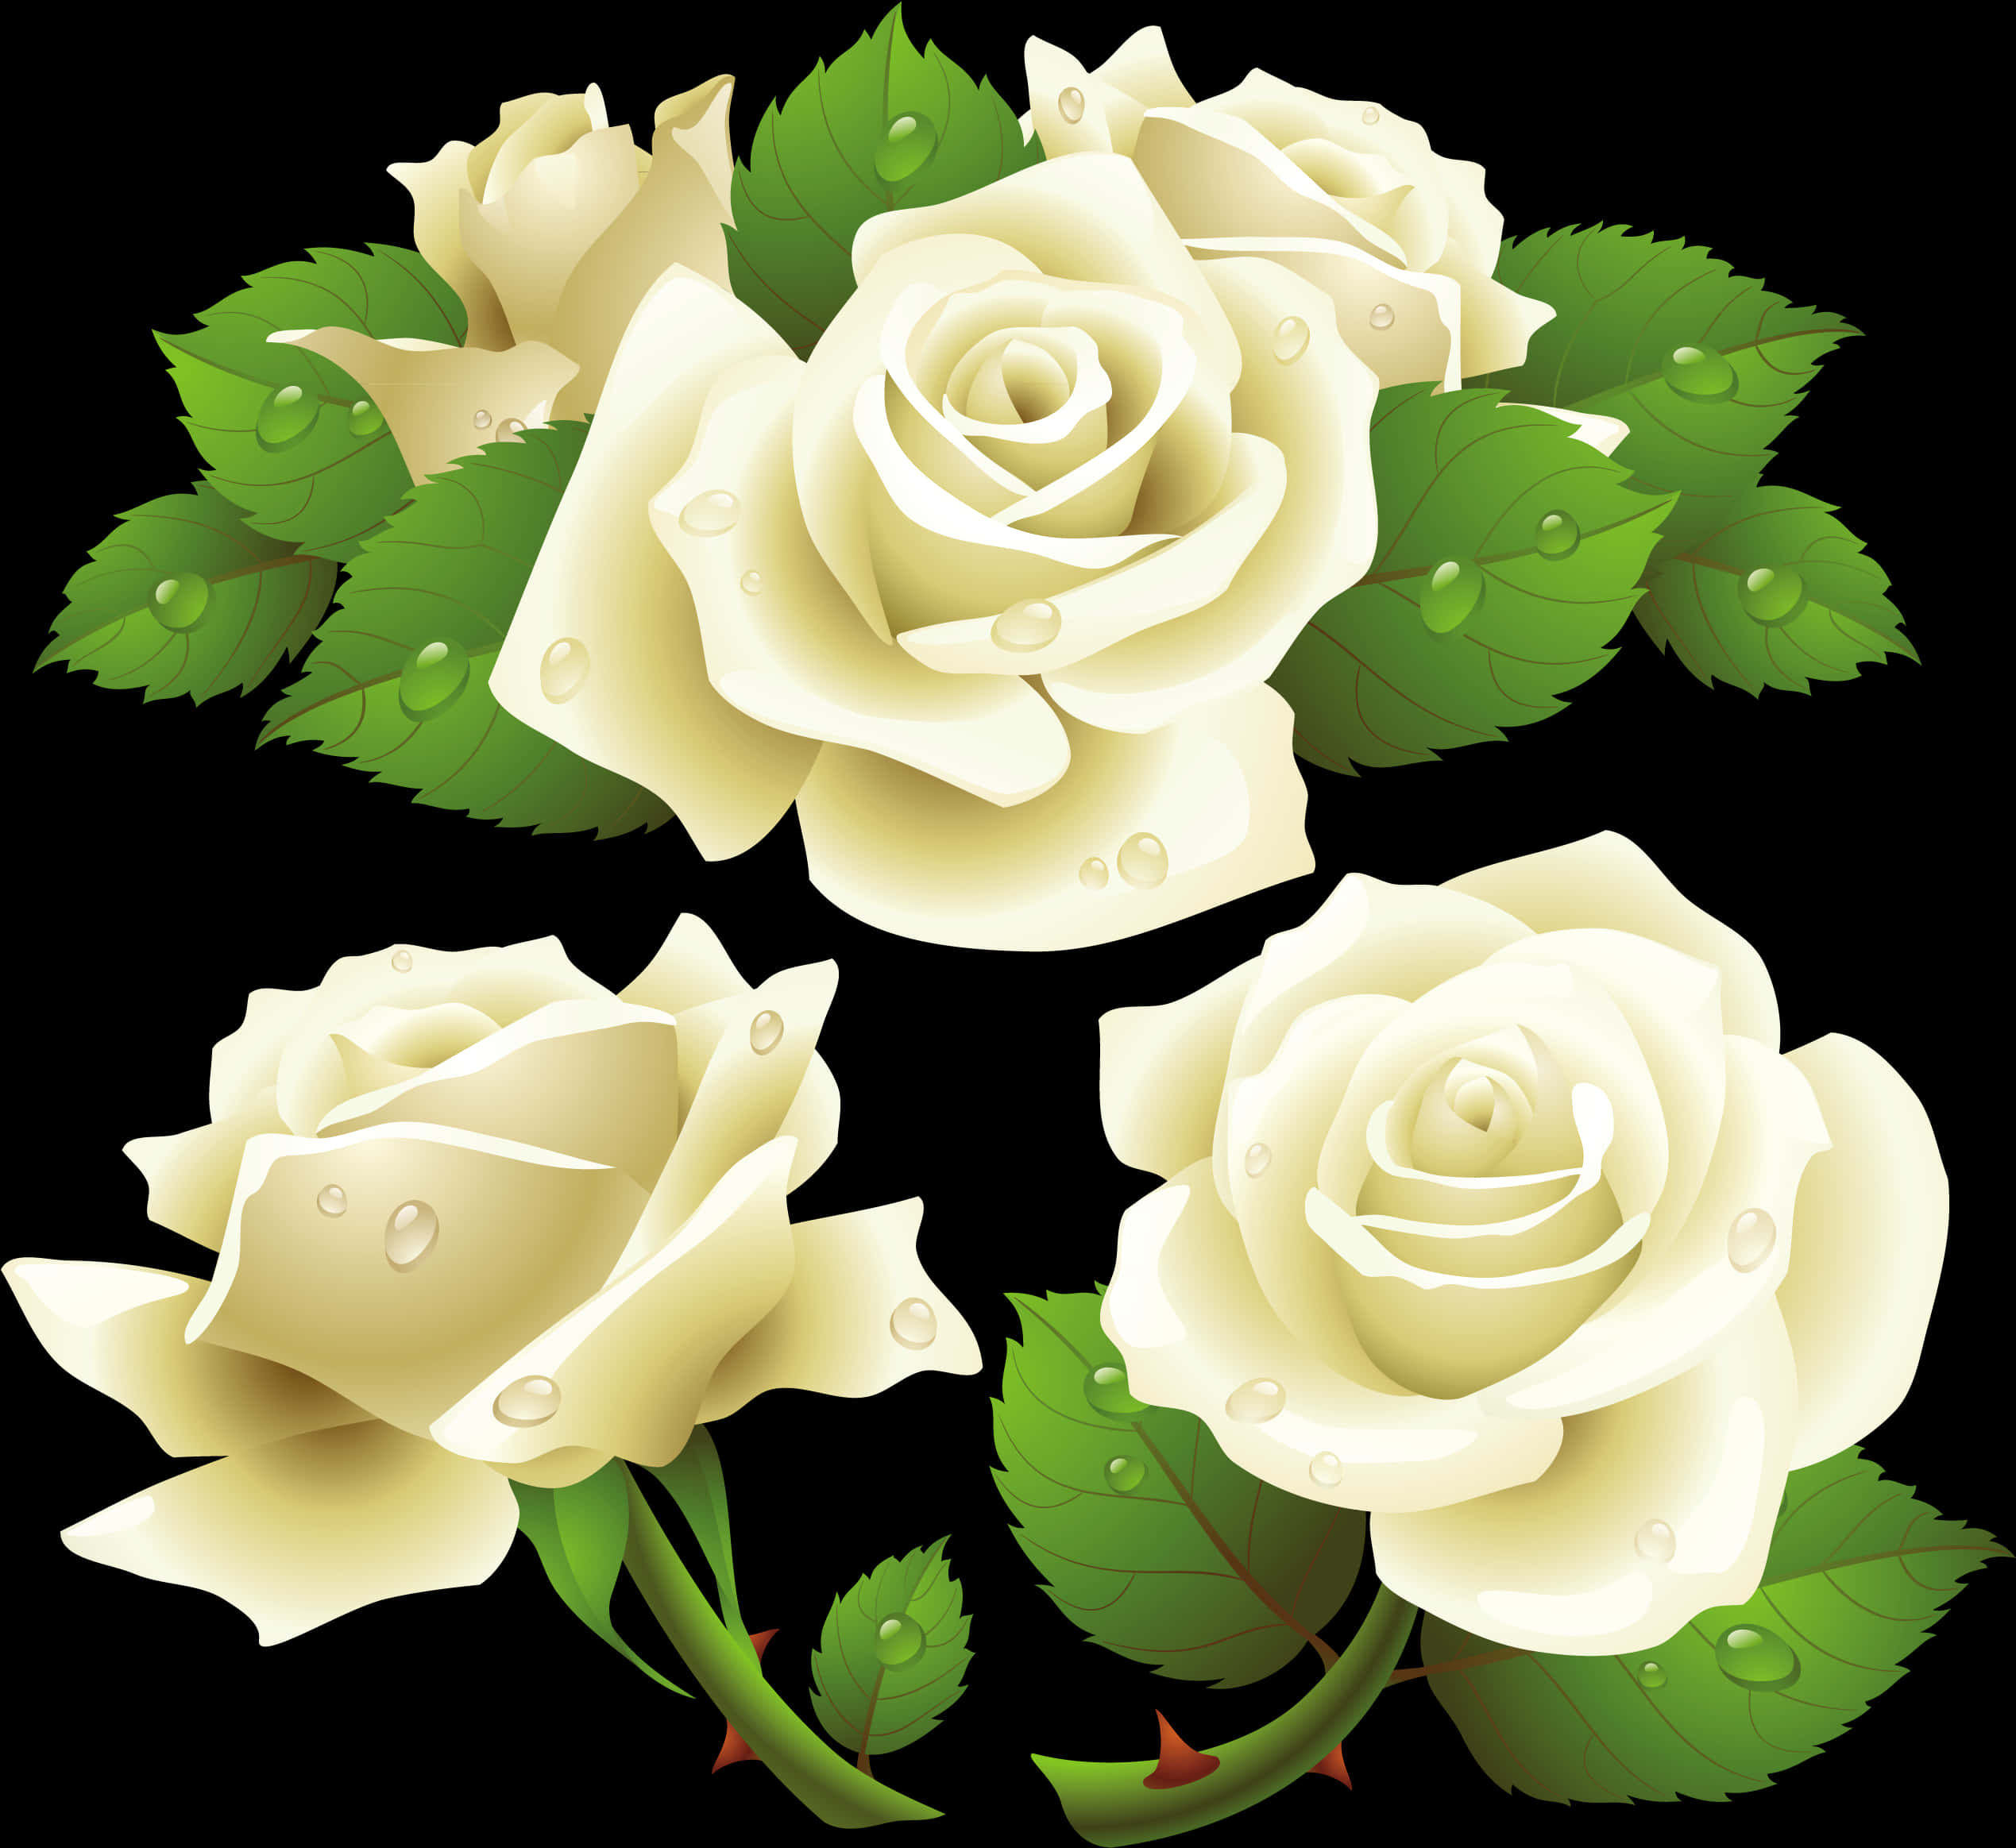 White Roses Vector Illustration PNG image